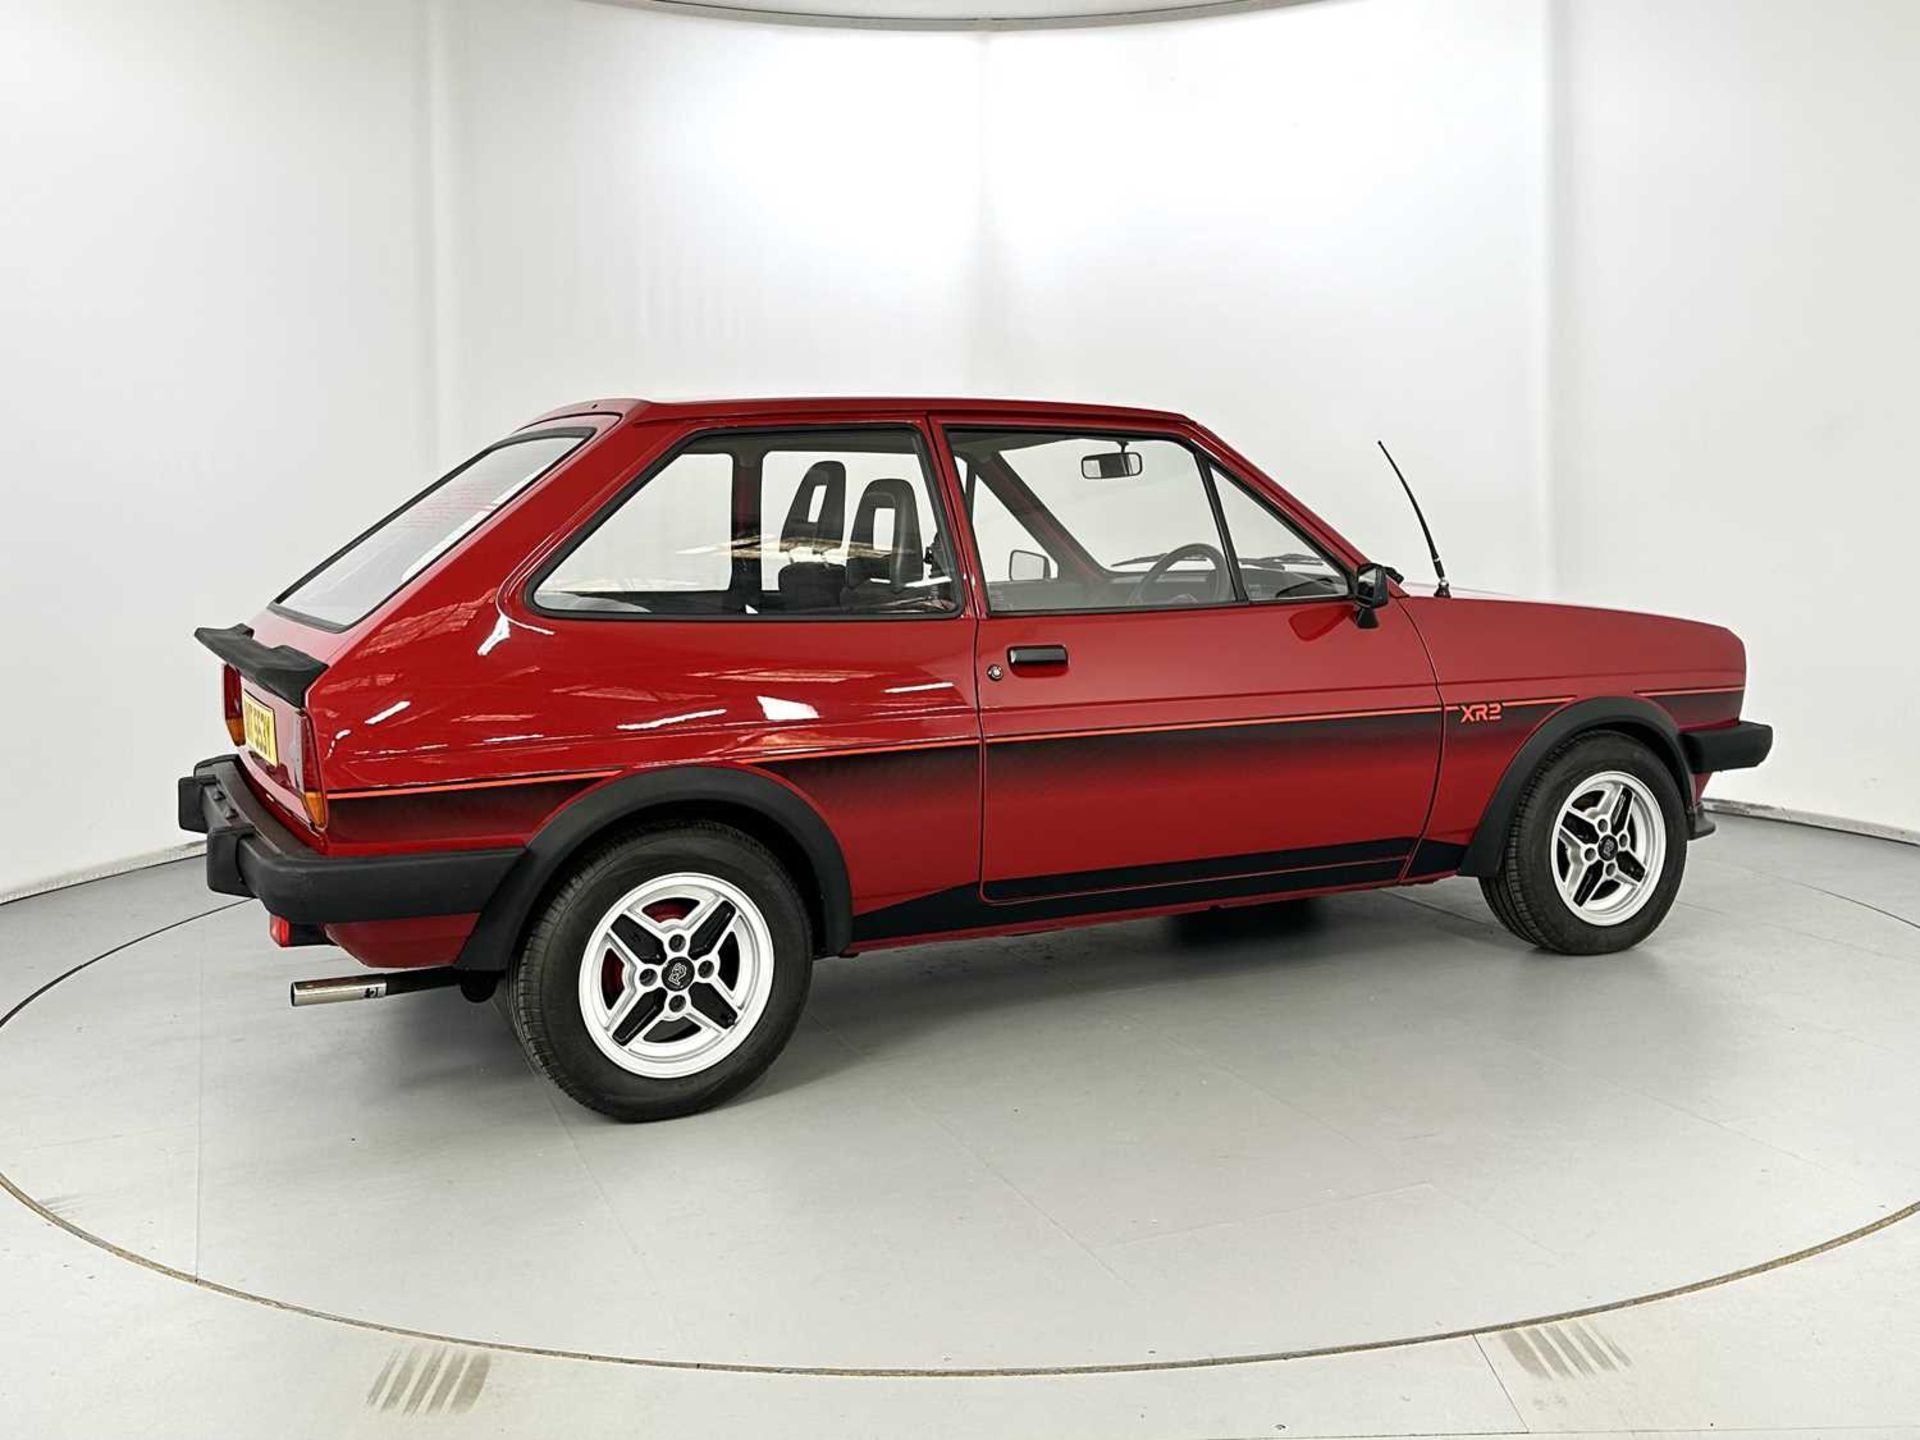 1983 Ford Fiesta - Image 10 of 31